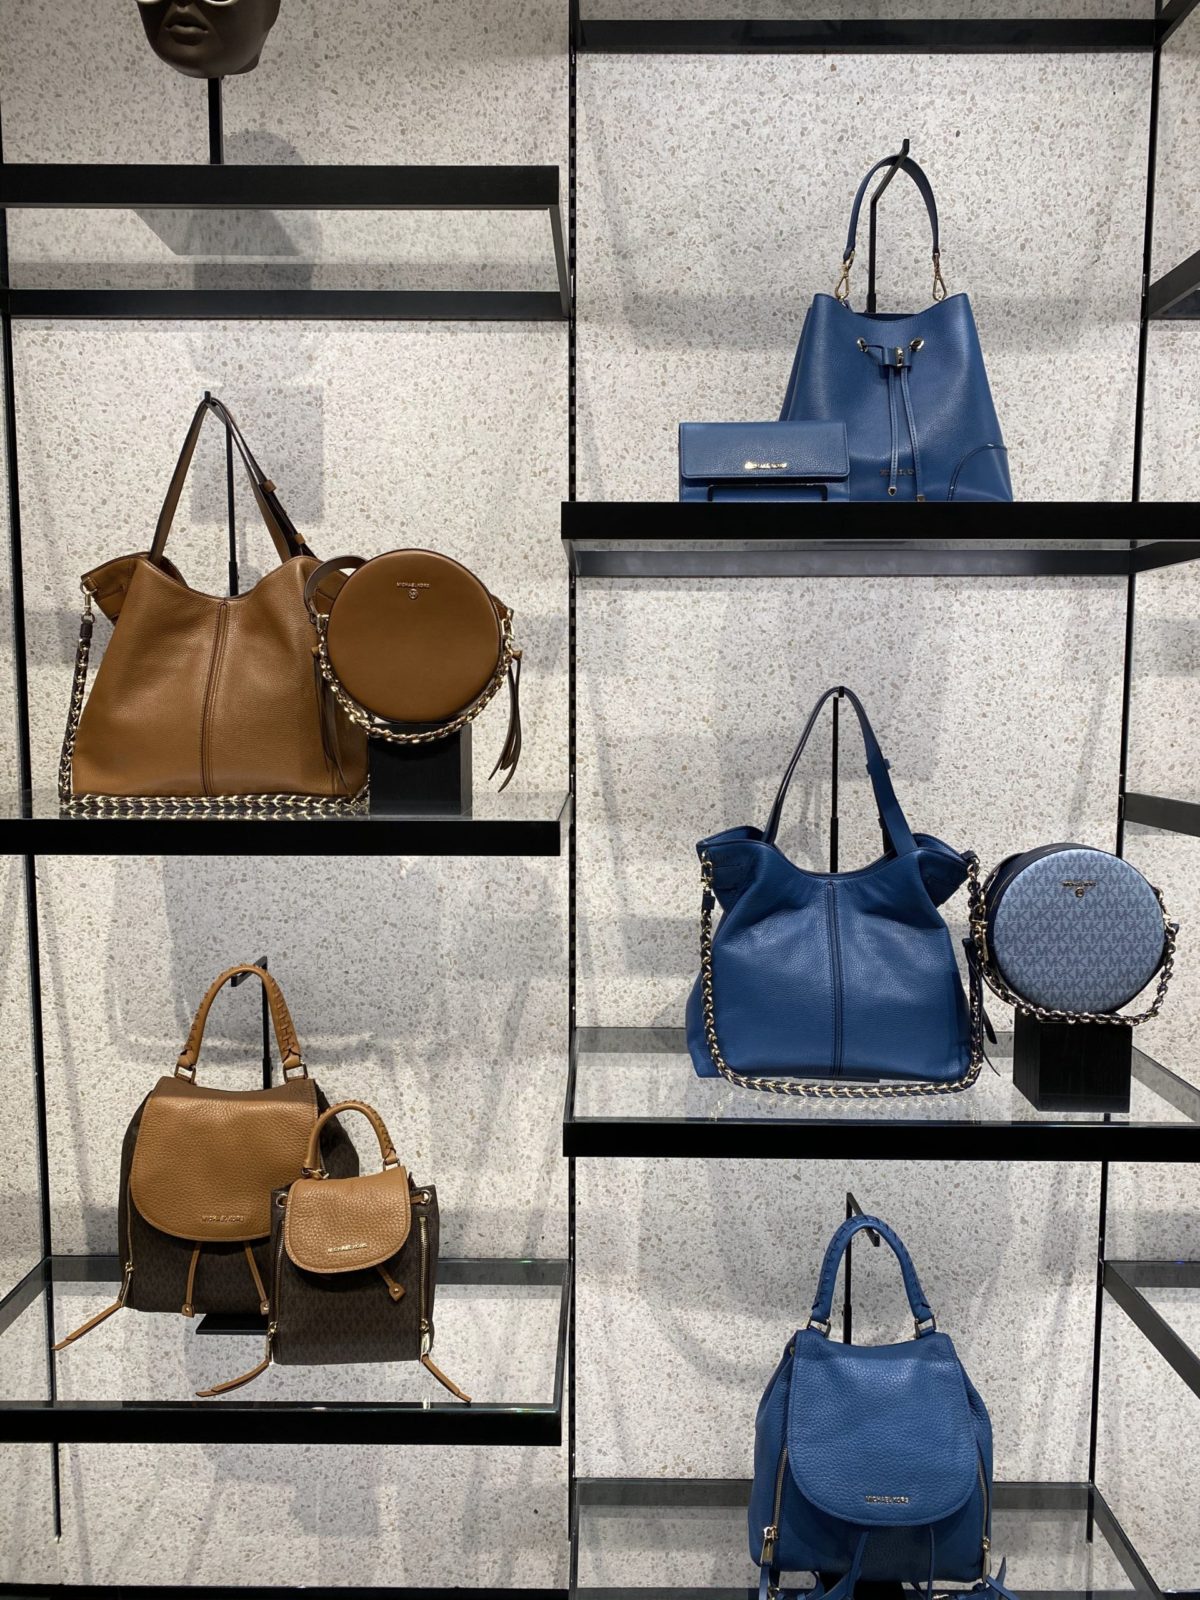 Michael Kors' display of purses, bags entices gift ideas for Valentine ...